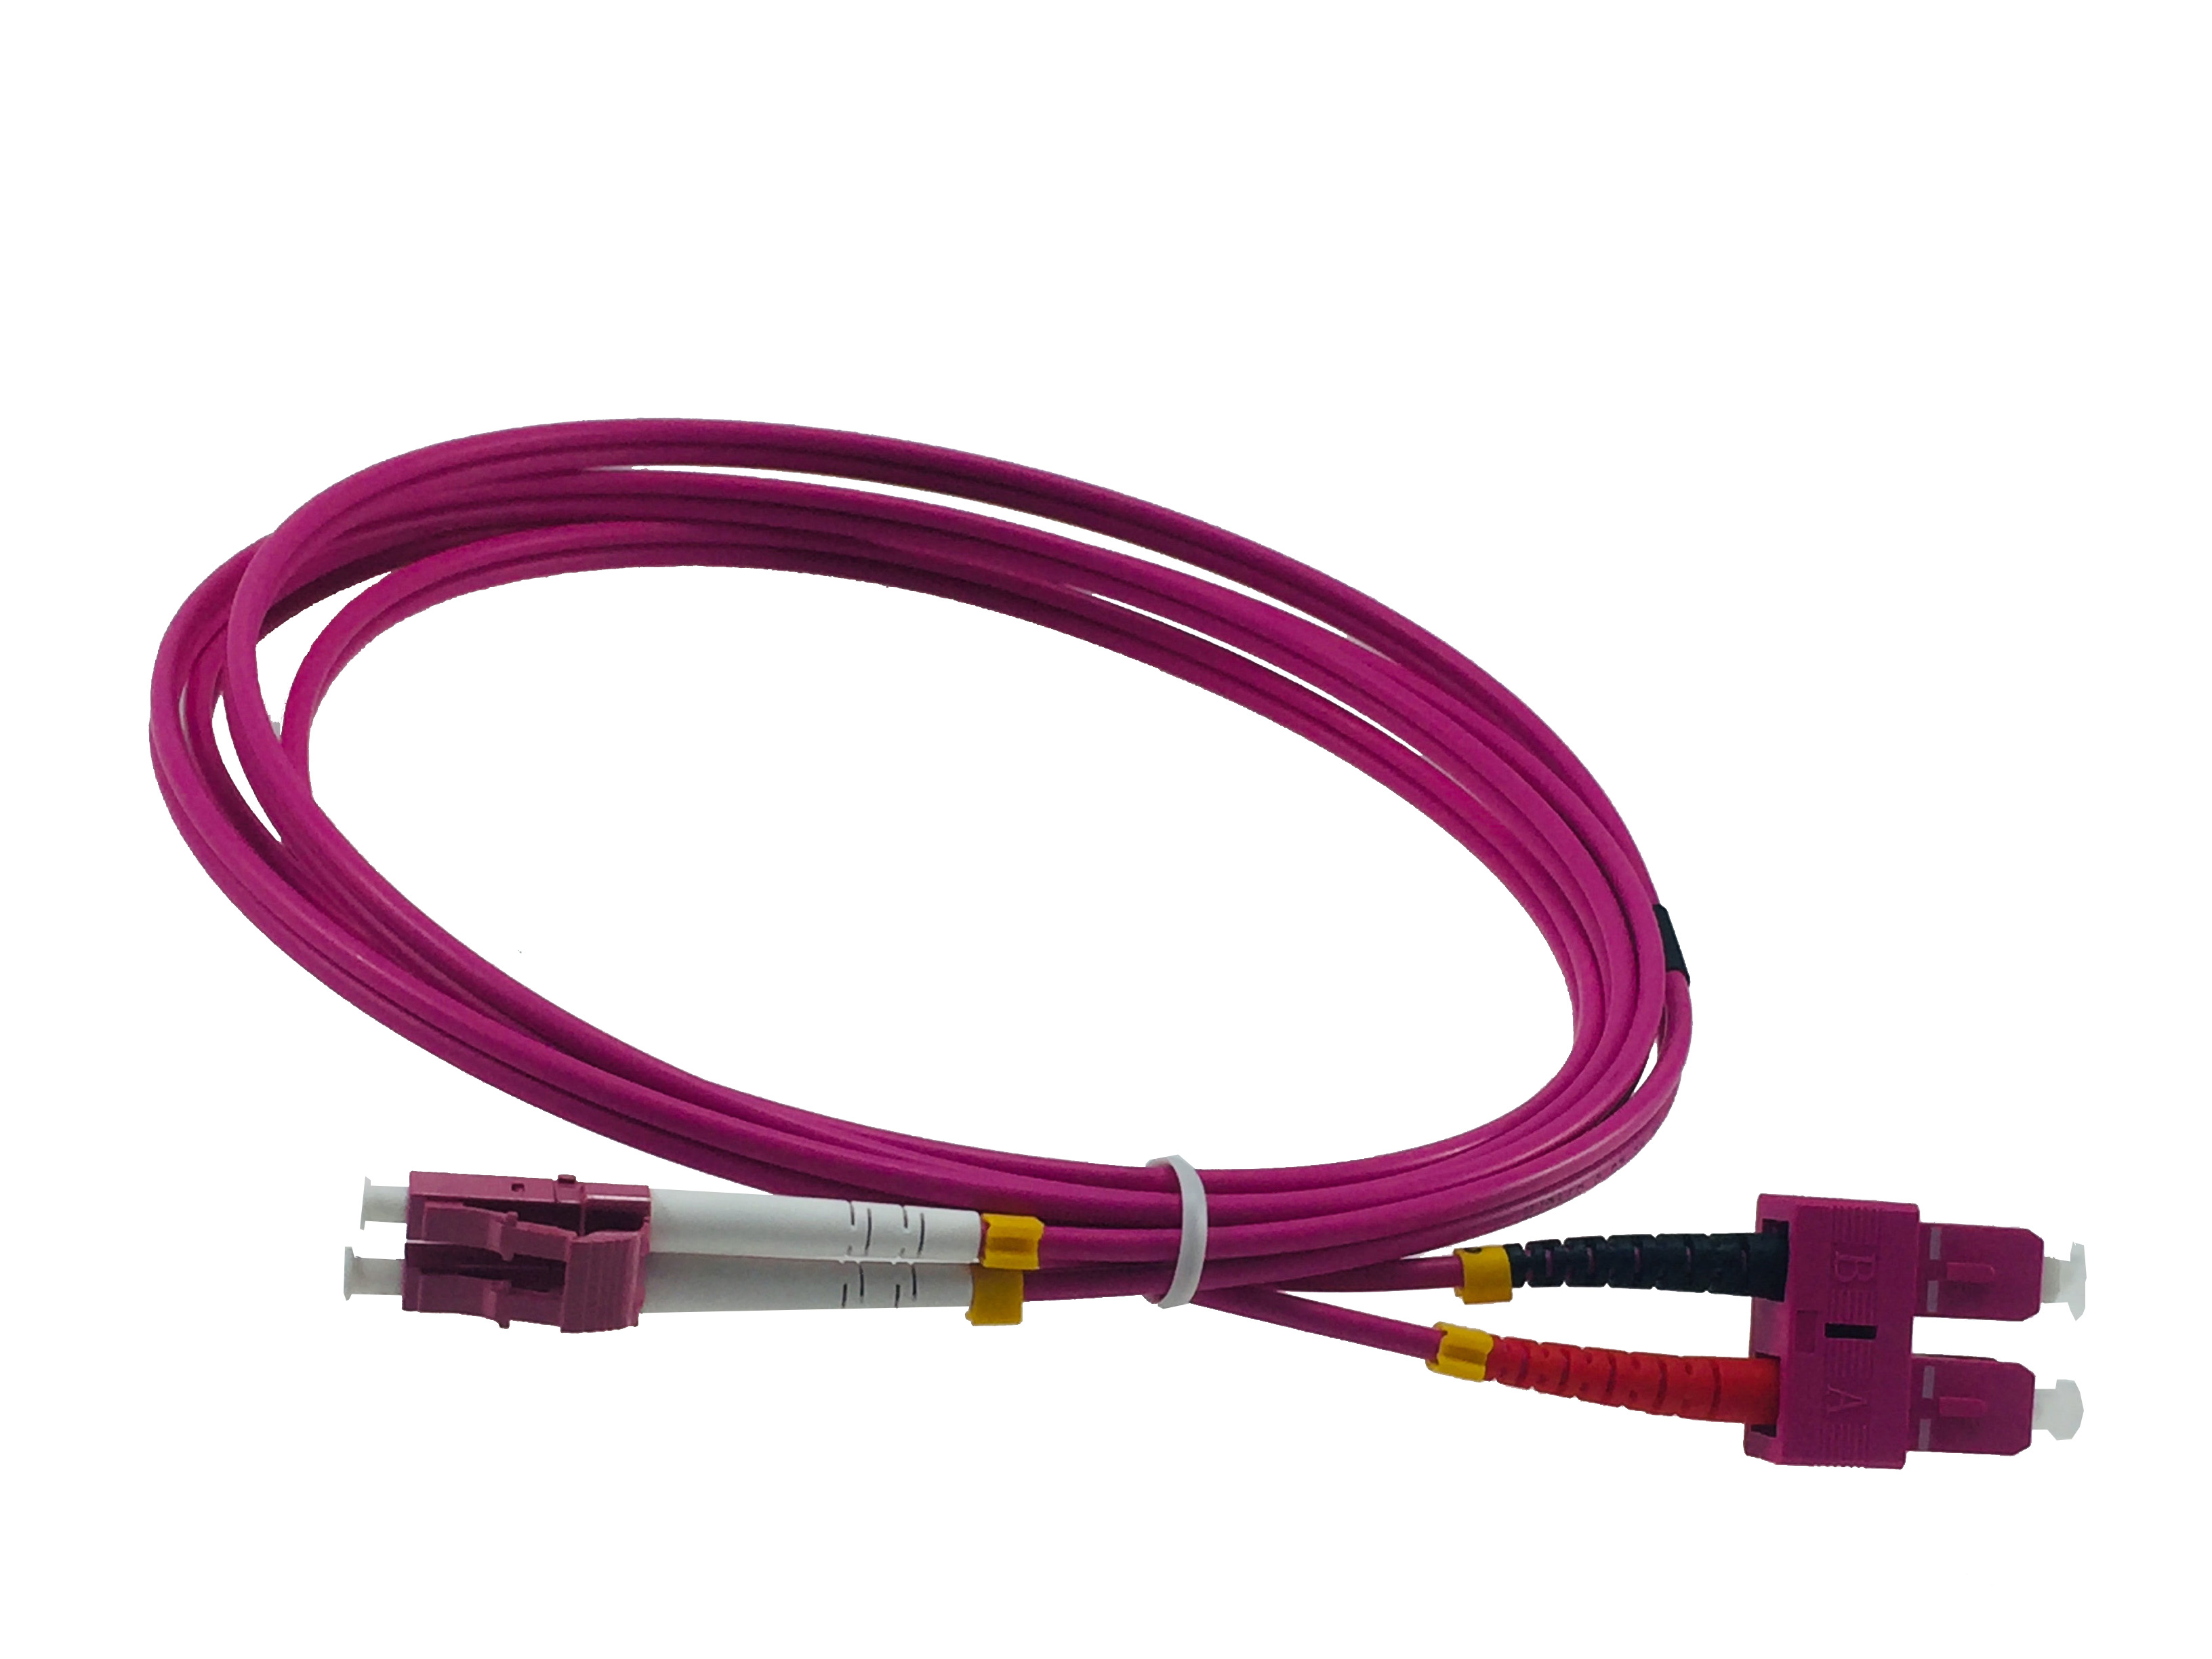  MM 50125 OM3 OM4 SC to LC duplex fiber cable patch cord